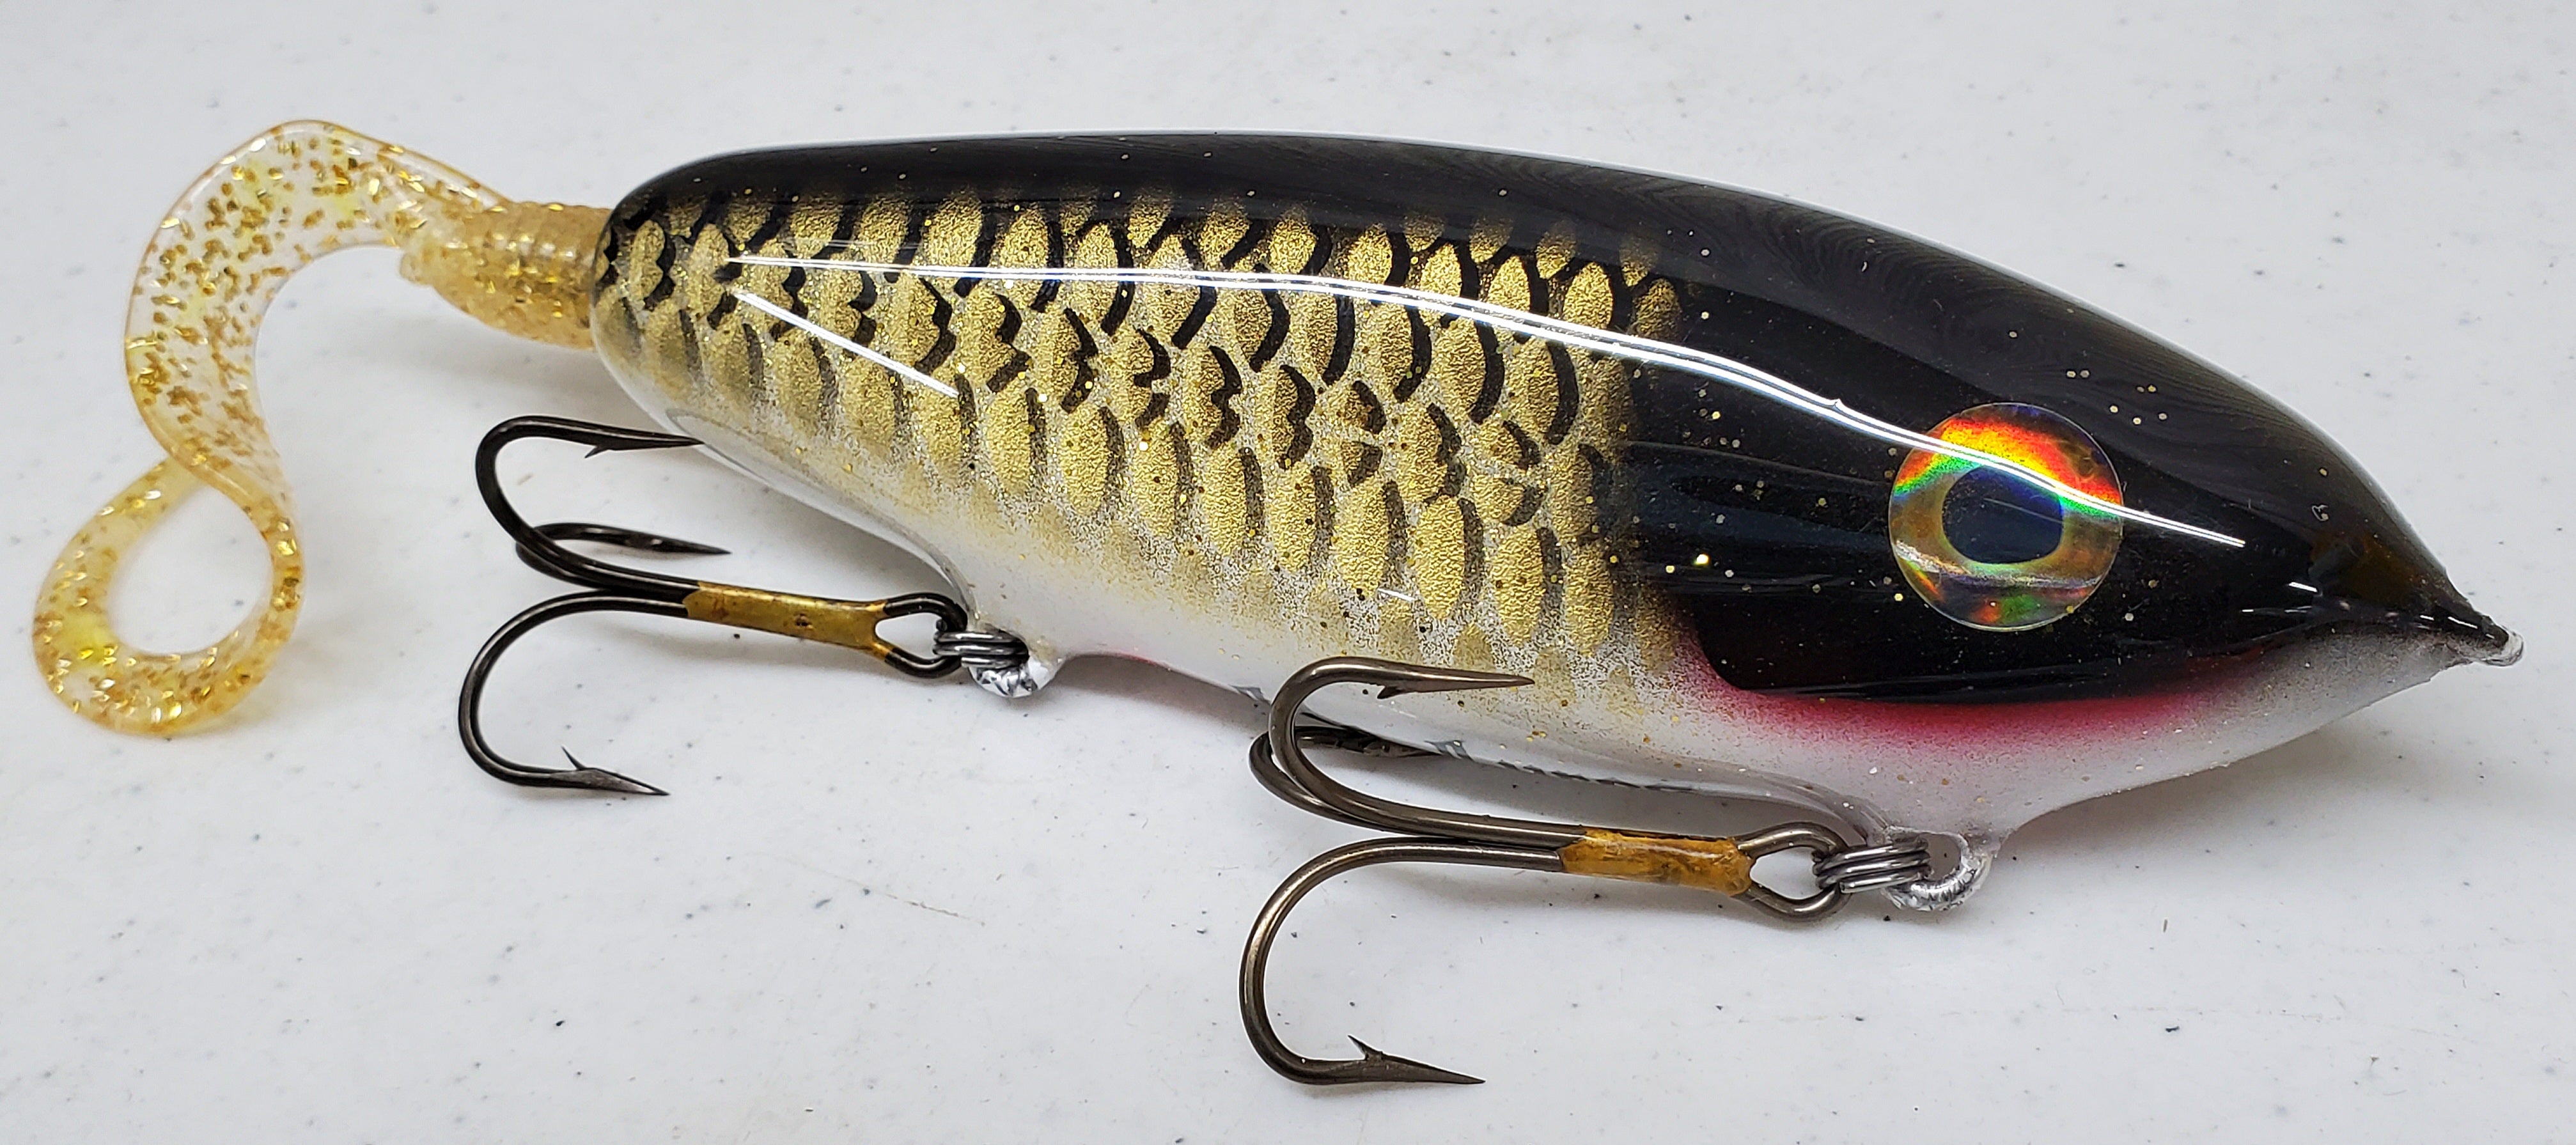 Slaunch Glide - Lee Lures